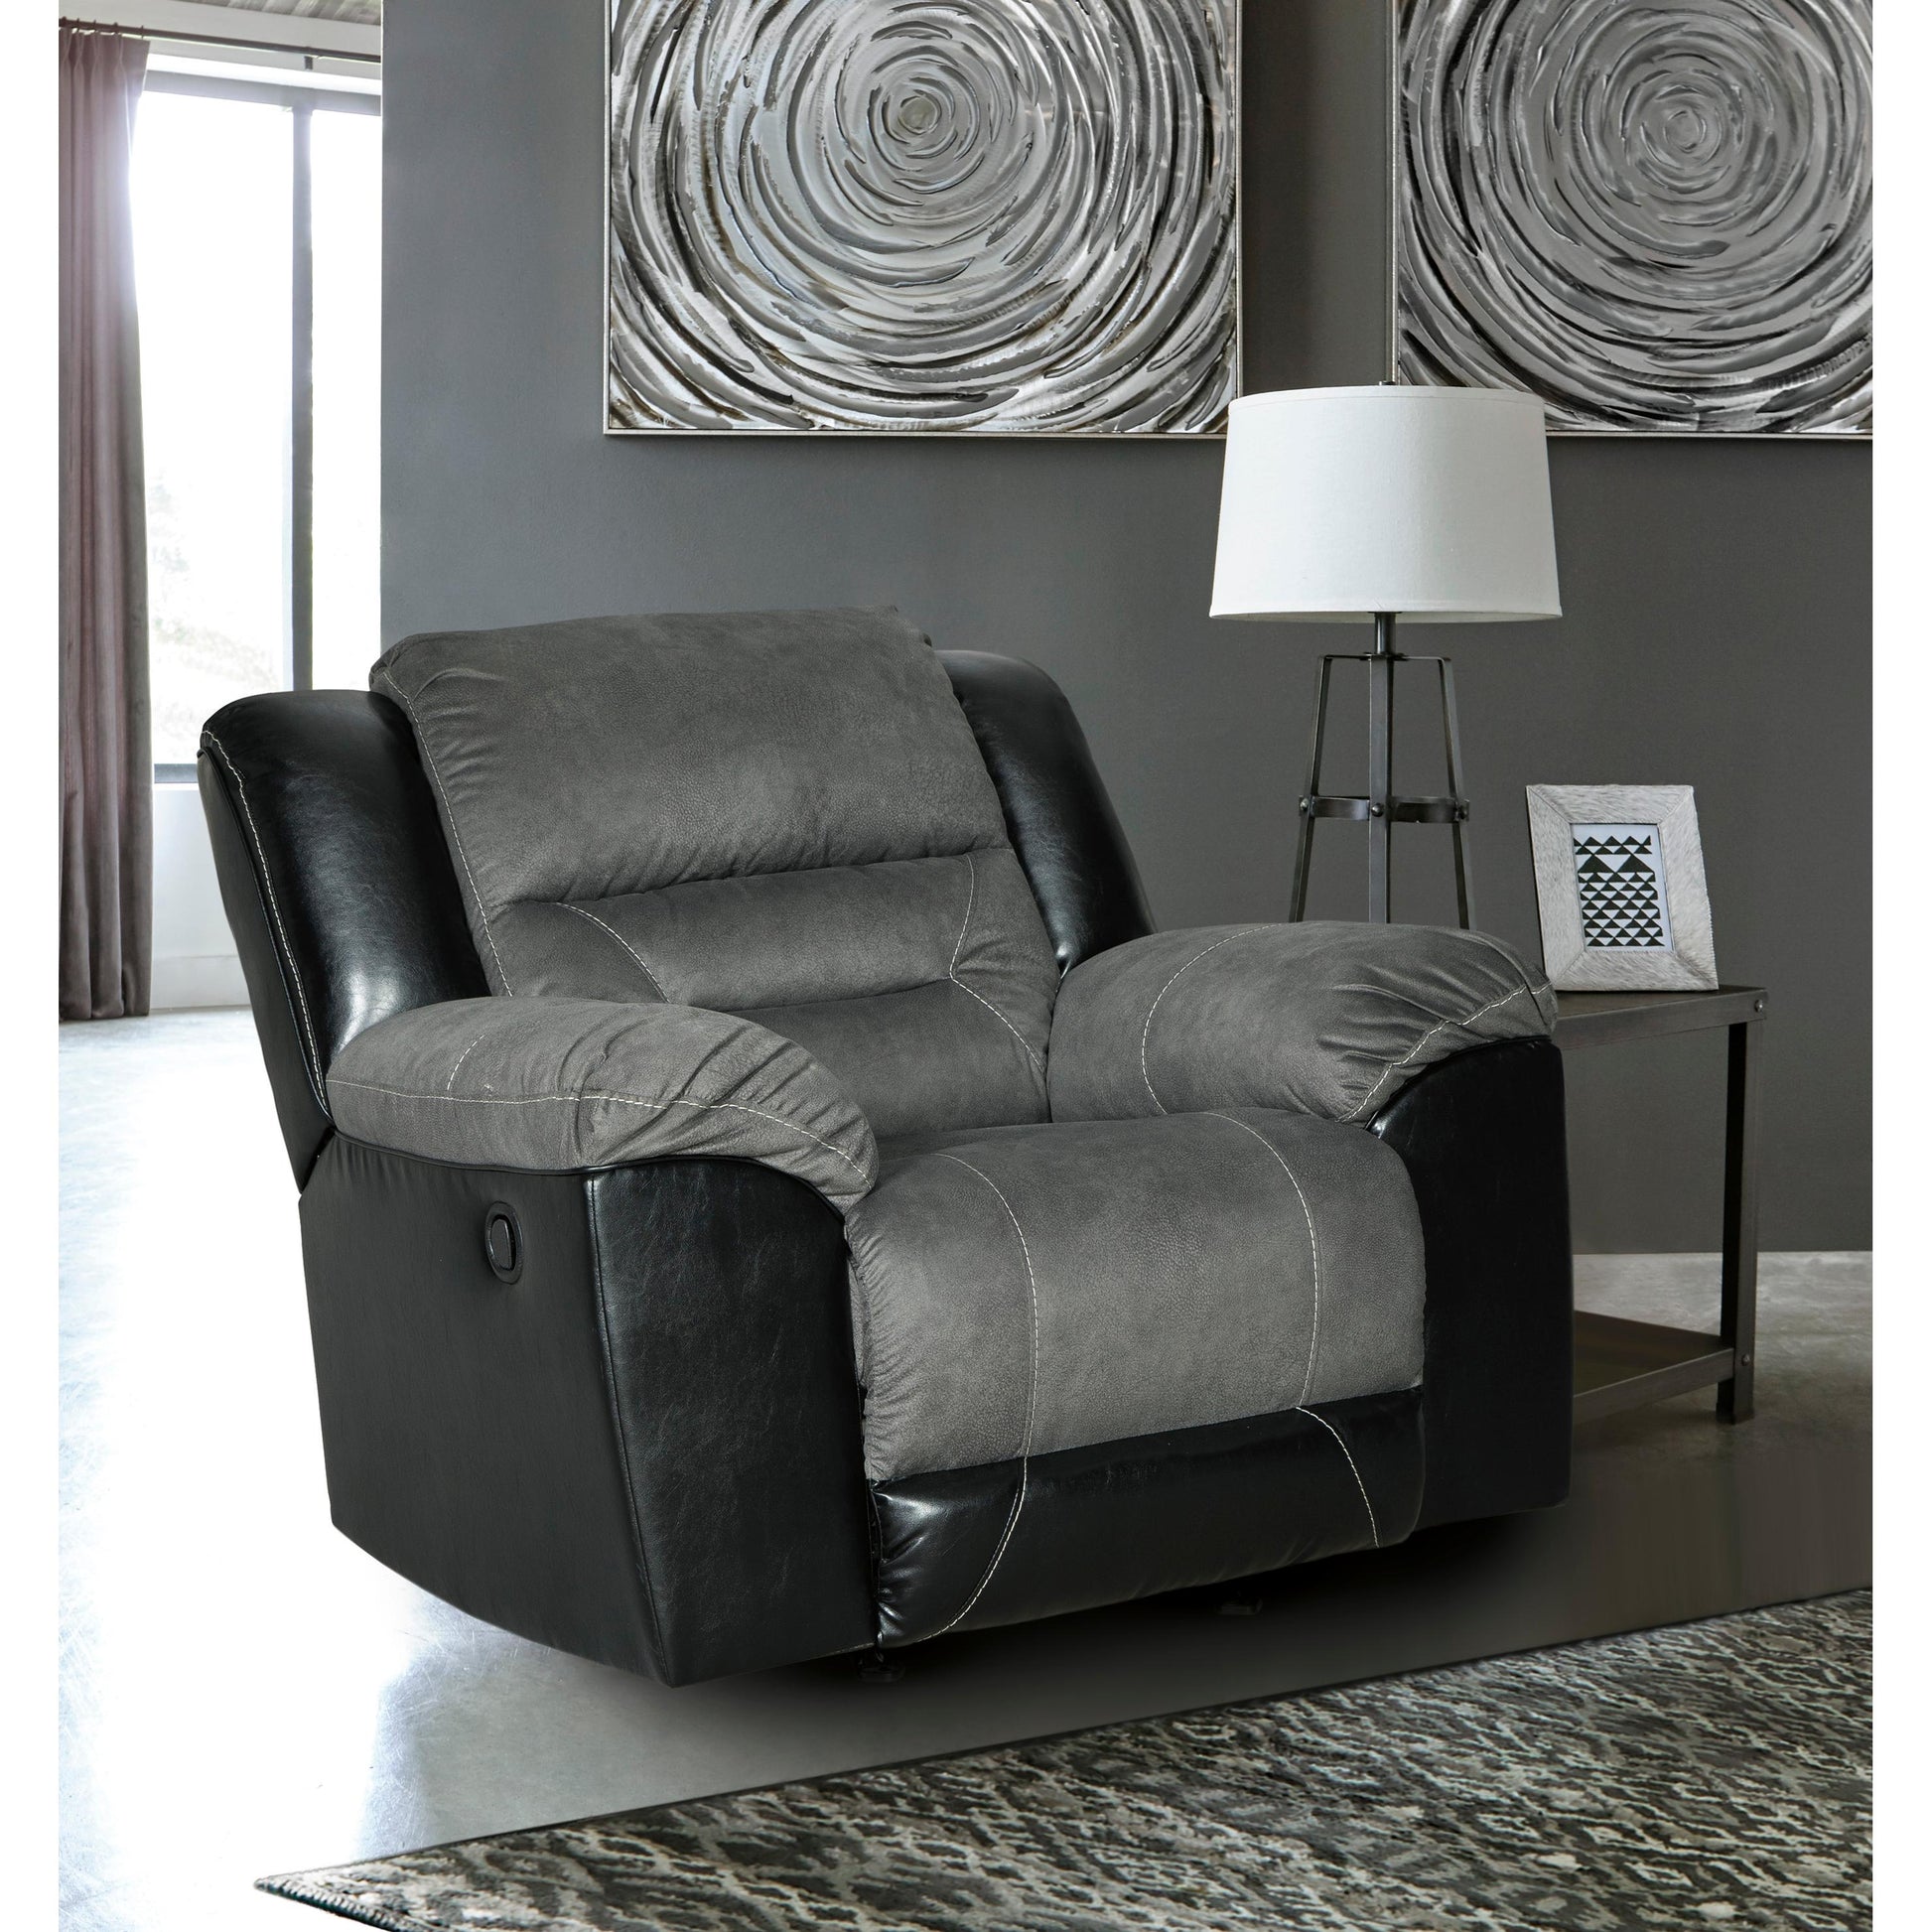 Signature Design by Ashley Earhart Rocker Fabric and Leather Look Recliner 2910225